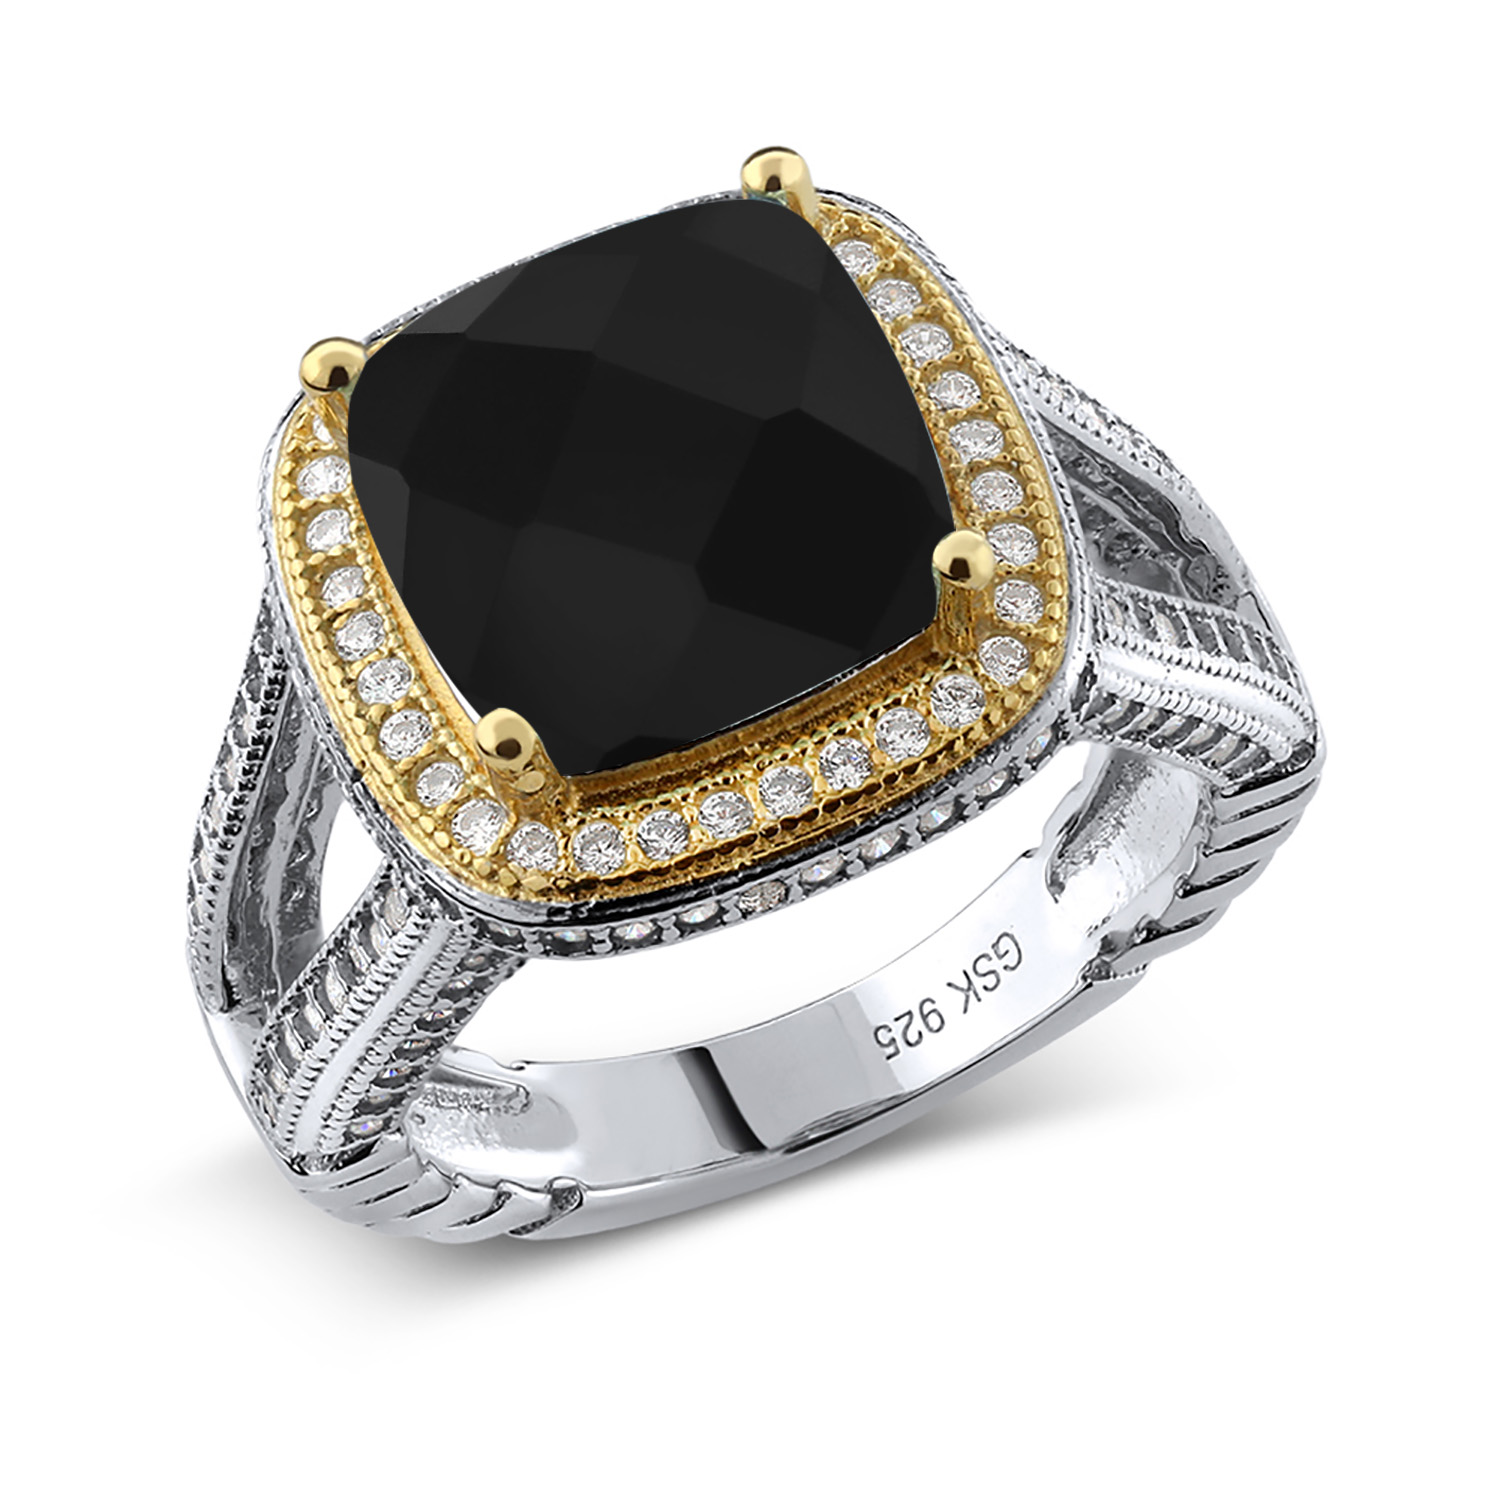 Gem Stone King 925 Two-Tone Sterling Silver 5.66 Ct Cushion Checkerboard Black Onyx Halo Ring